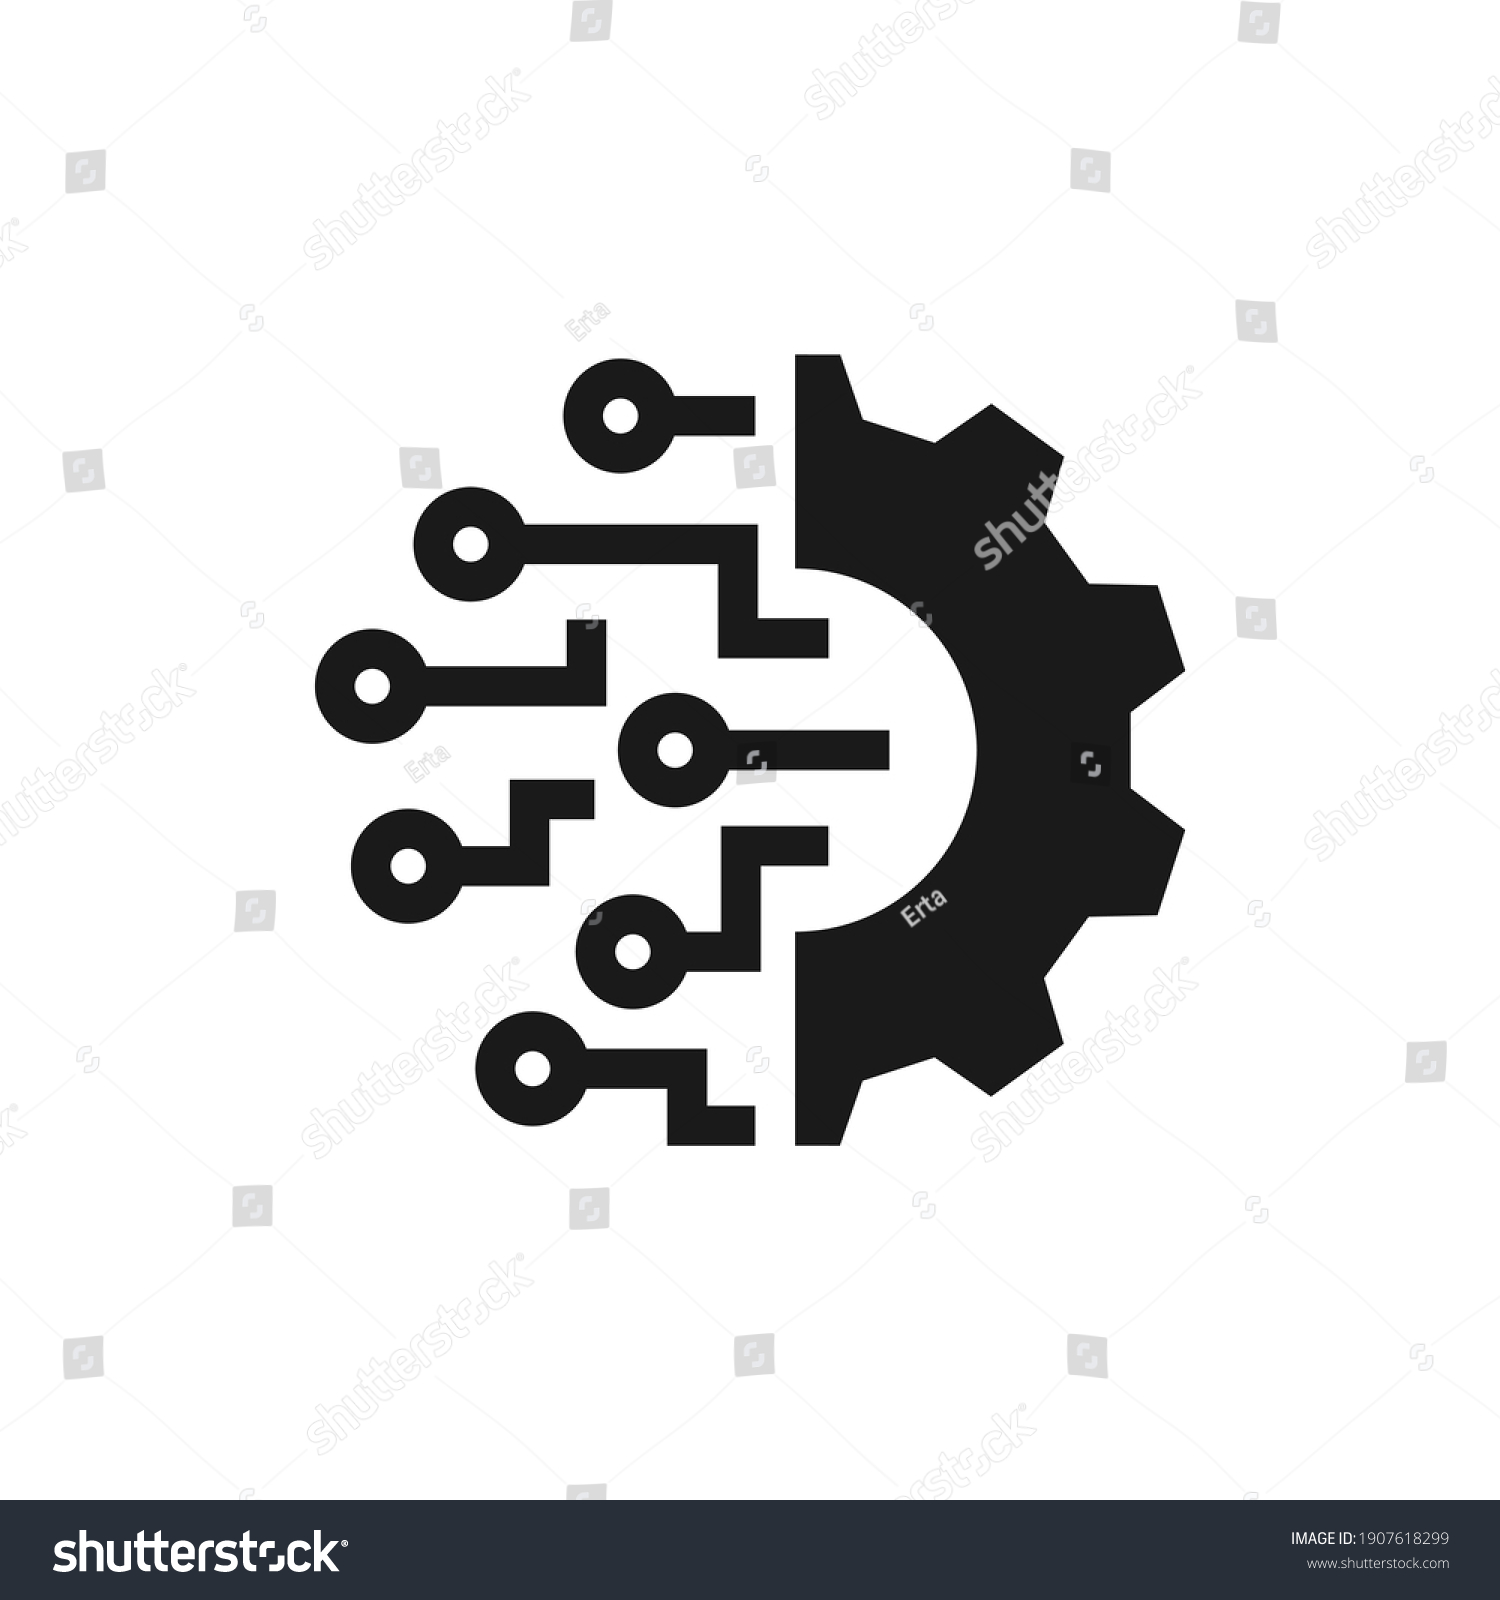 Digital technology gear icon concept isolated on white background. Vector illustration #1907618299